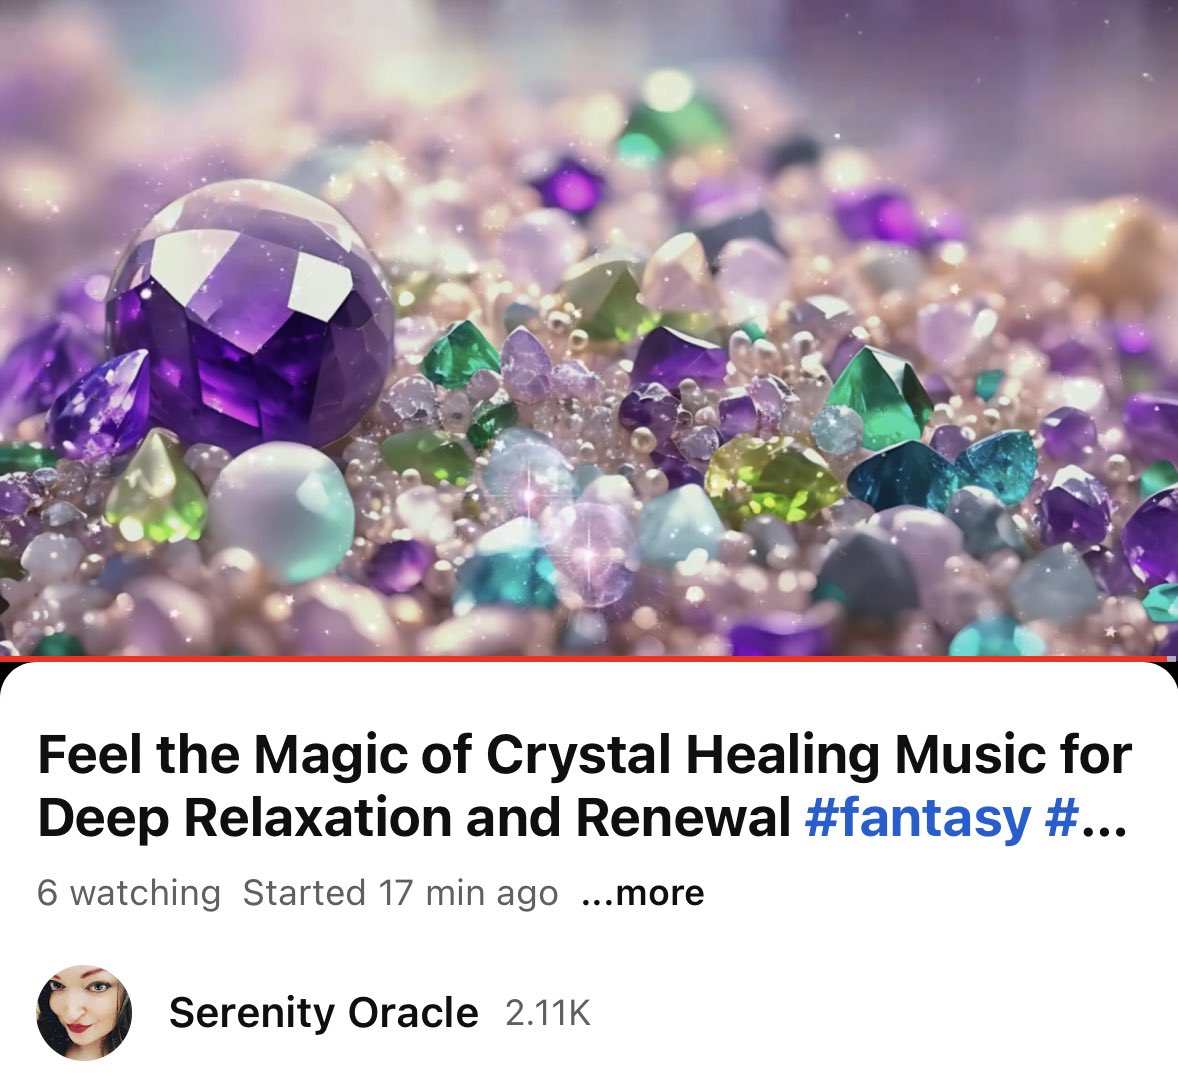 Feel the Magic of Crystal Healing Music for Deep Relaxation and Renewal ... youtube.com/live/Yg9qL2VO0… via @YouTube #youtube #youtuber 

#live #livestreaming #crystals #gems #gemstones #minerals #crystslshop #serenityoracle #relax #music #ambient #ambientmusic #musicforsleep #sleep